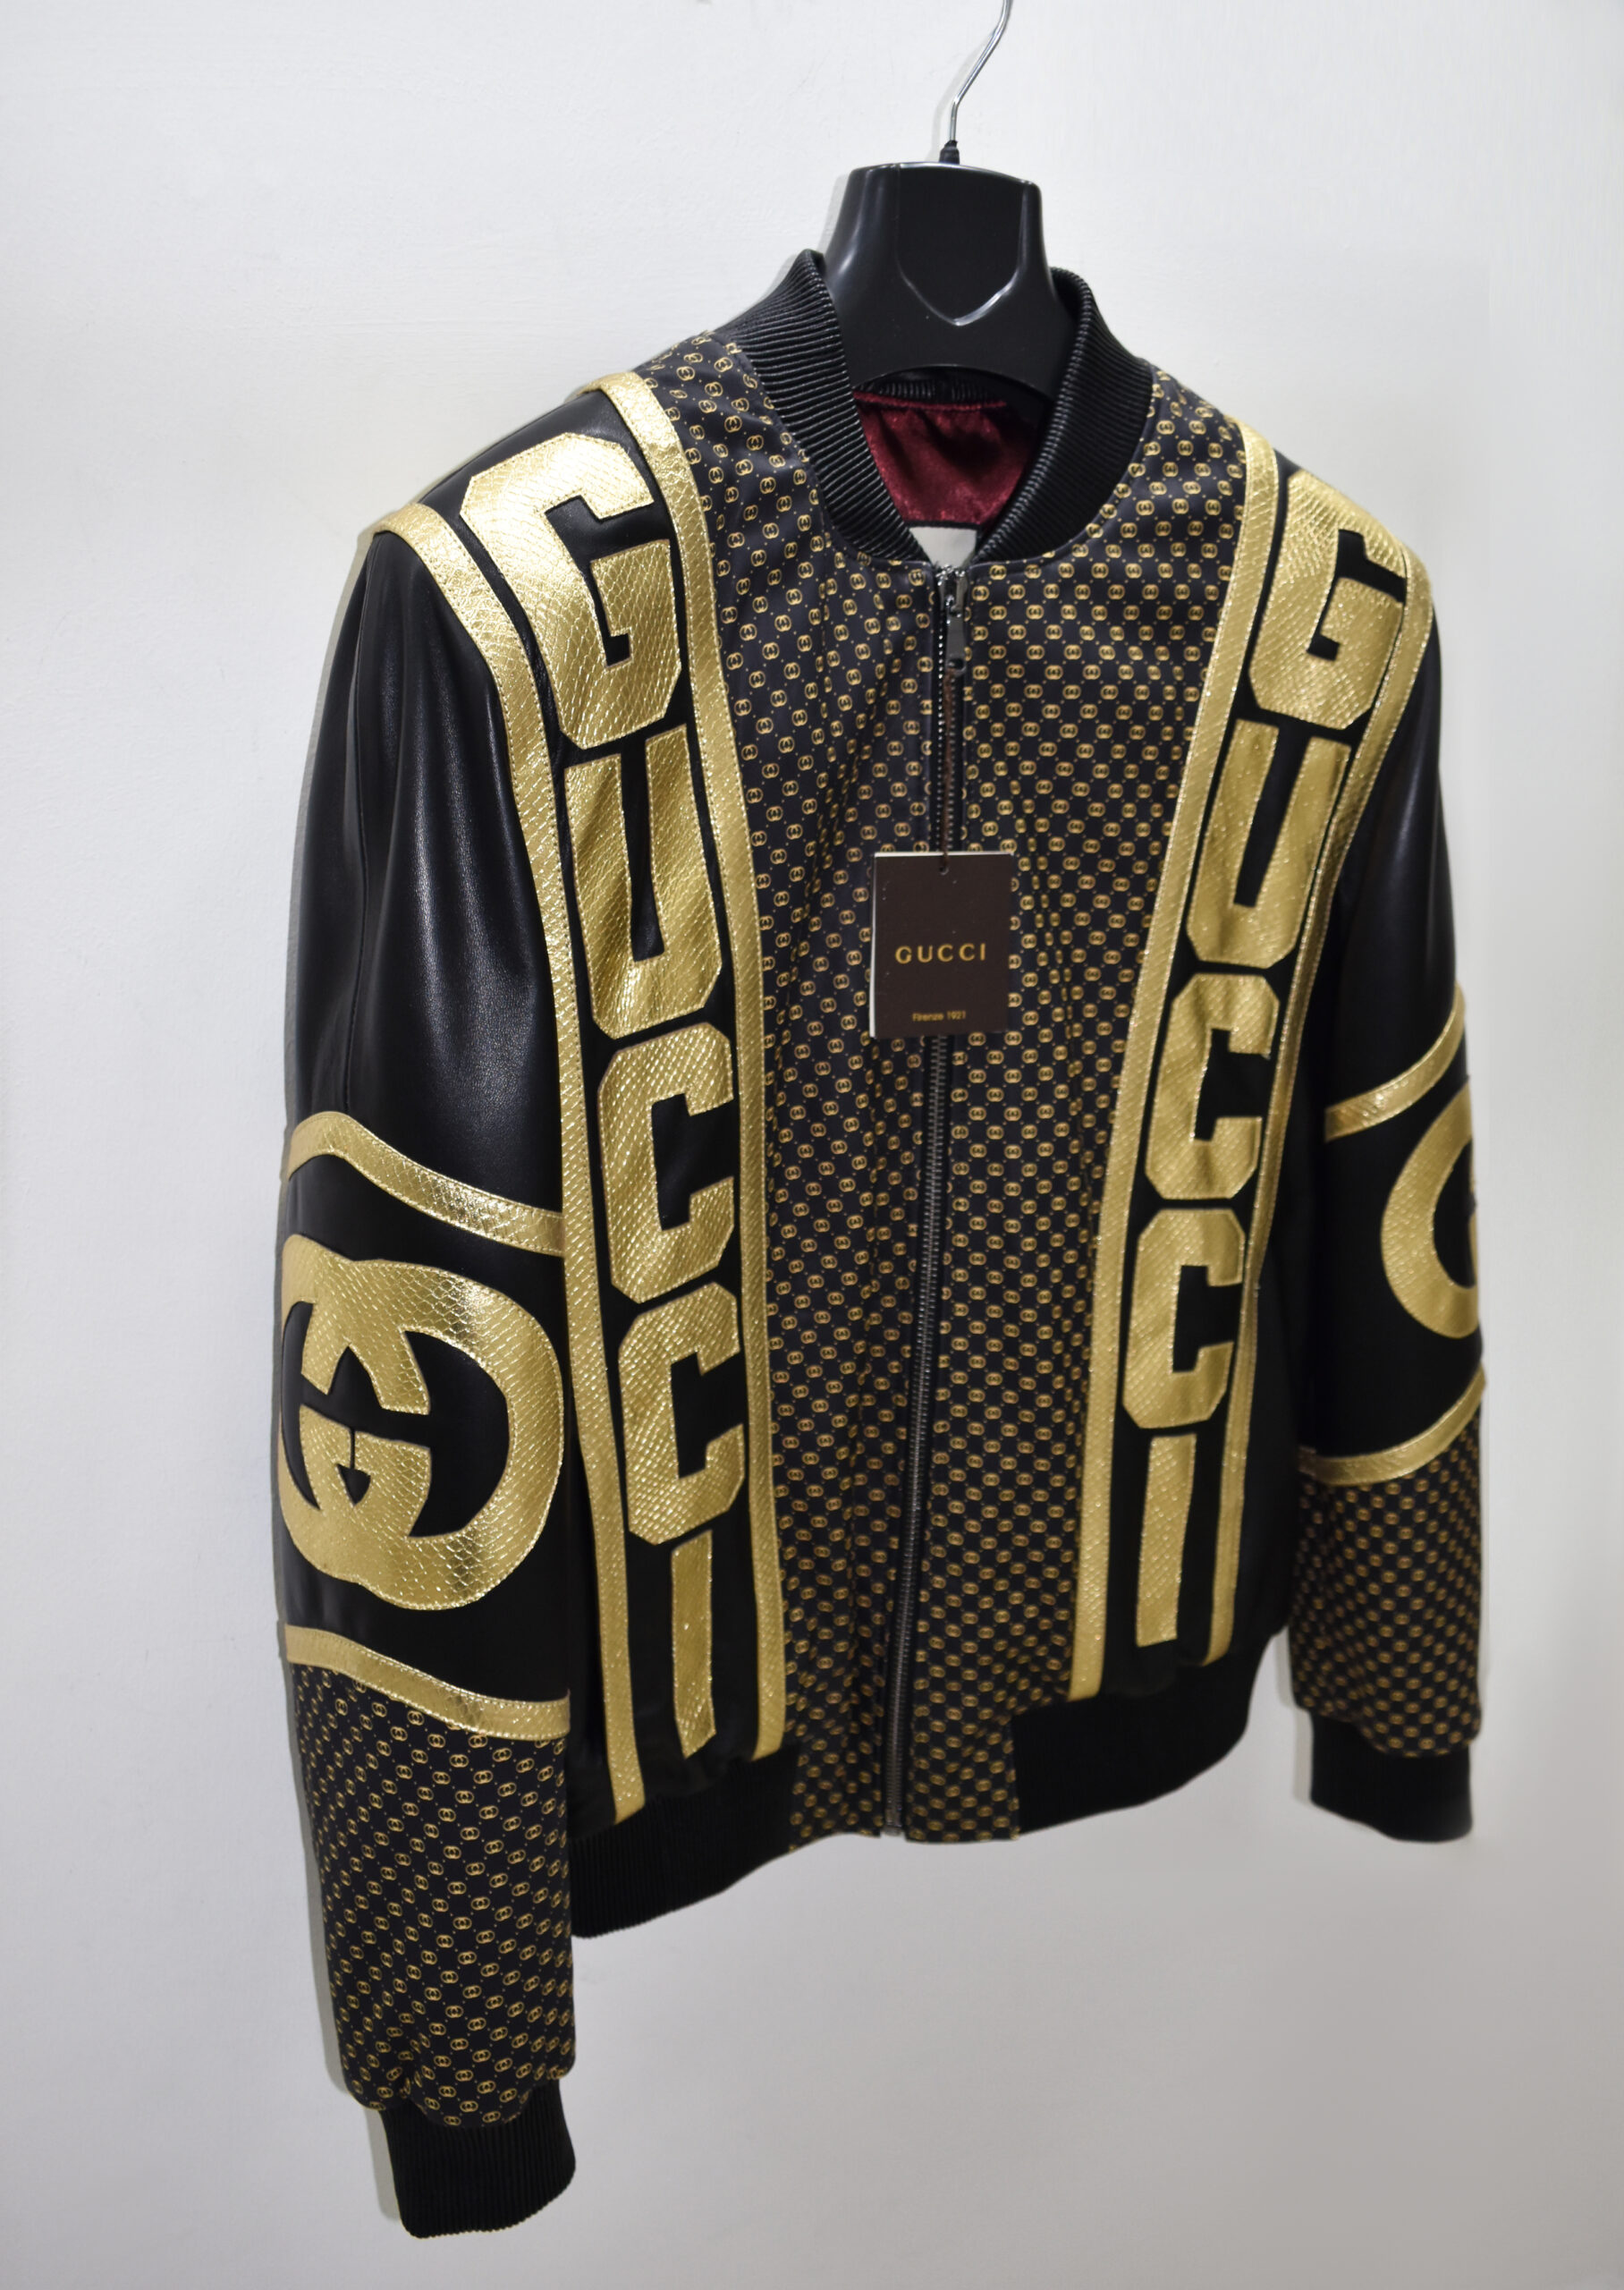 Gucci Black Yellow Leather Jacket - Leather Guys